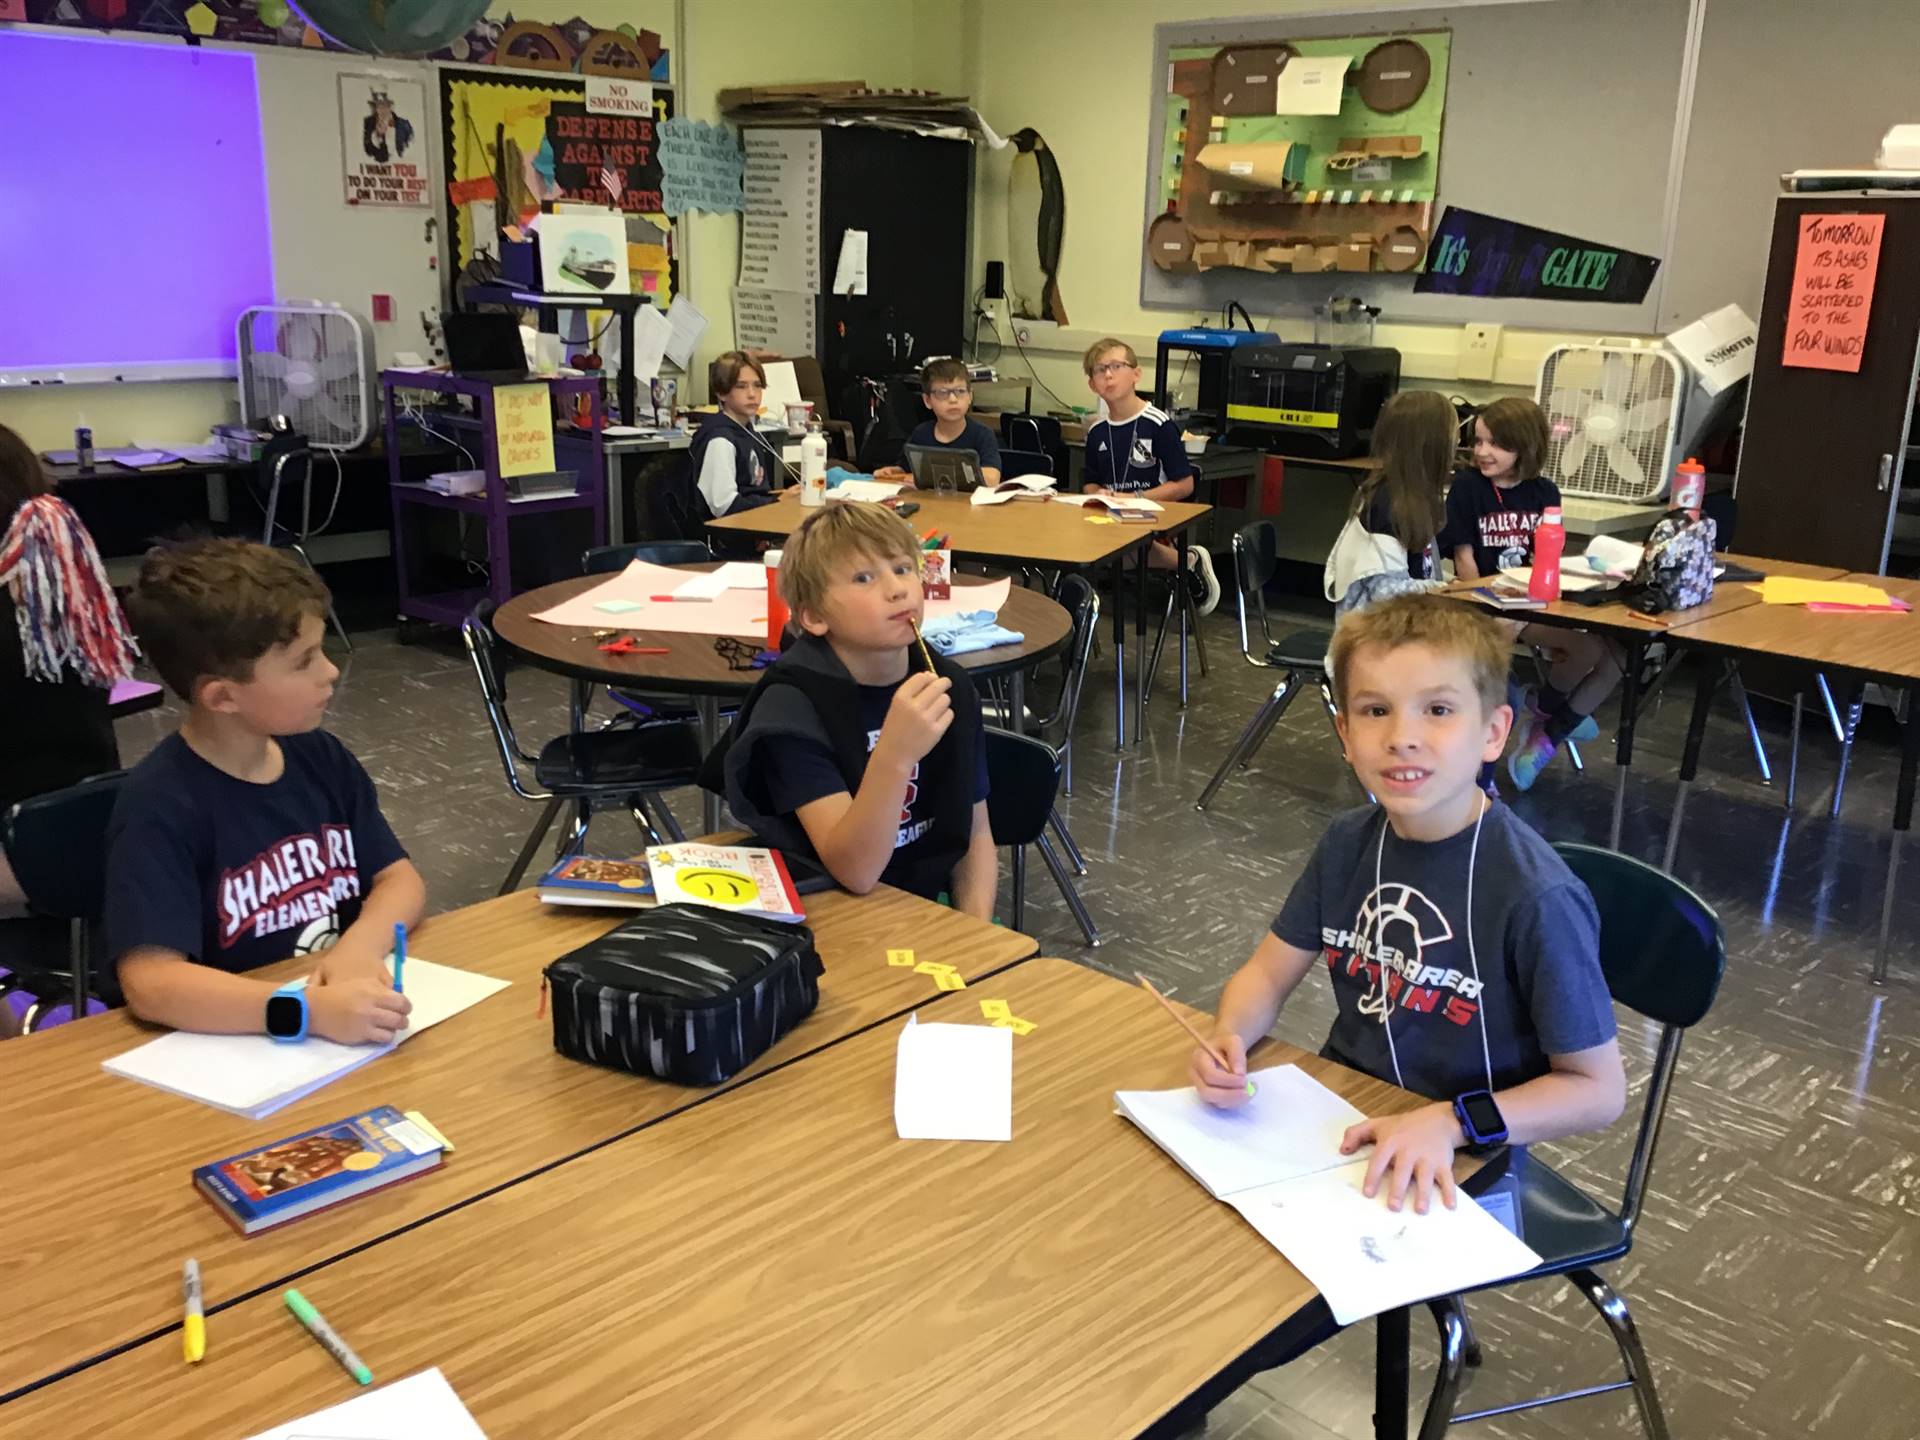 4th graders writing in notebooks